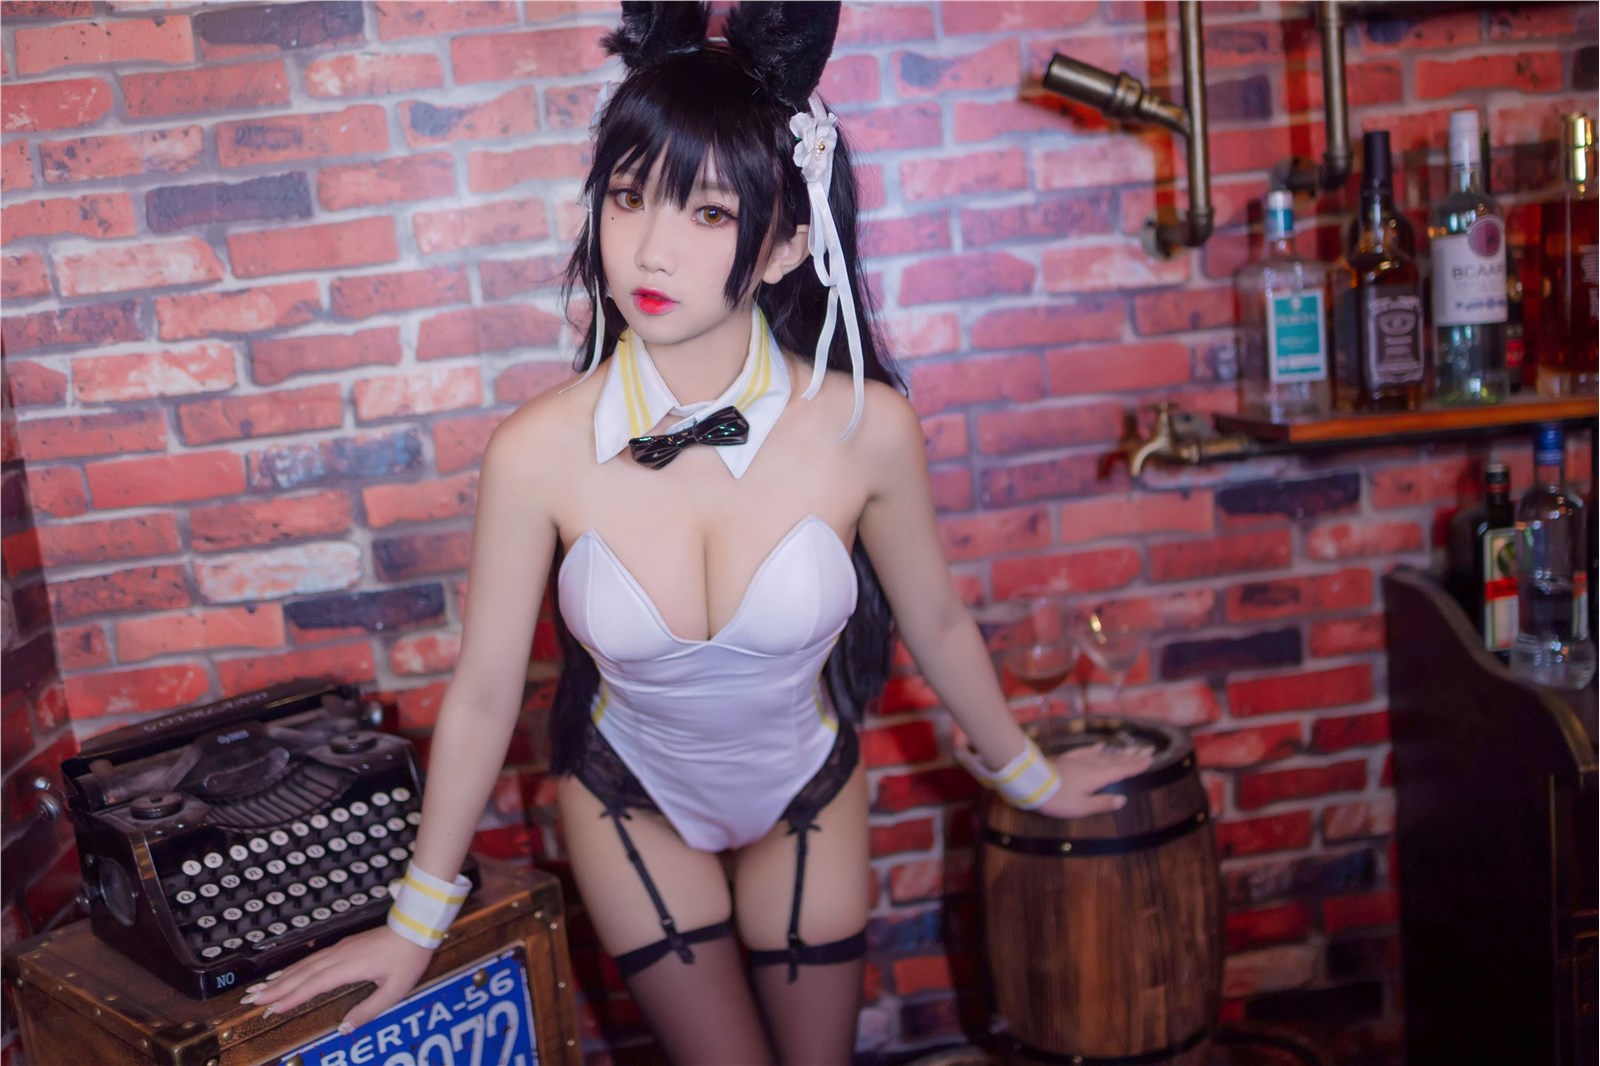 Cosplay is Yao in or not - bar Bunny(18)